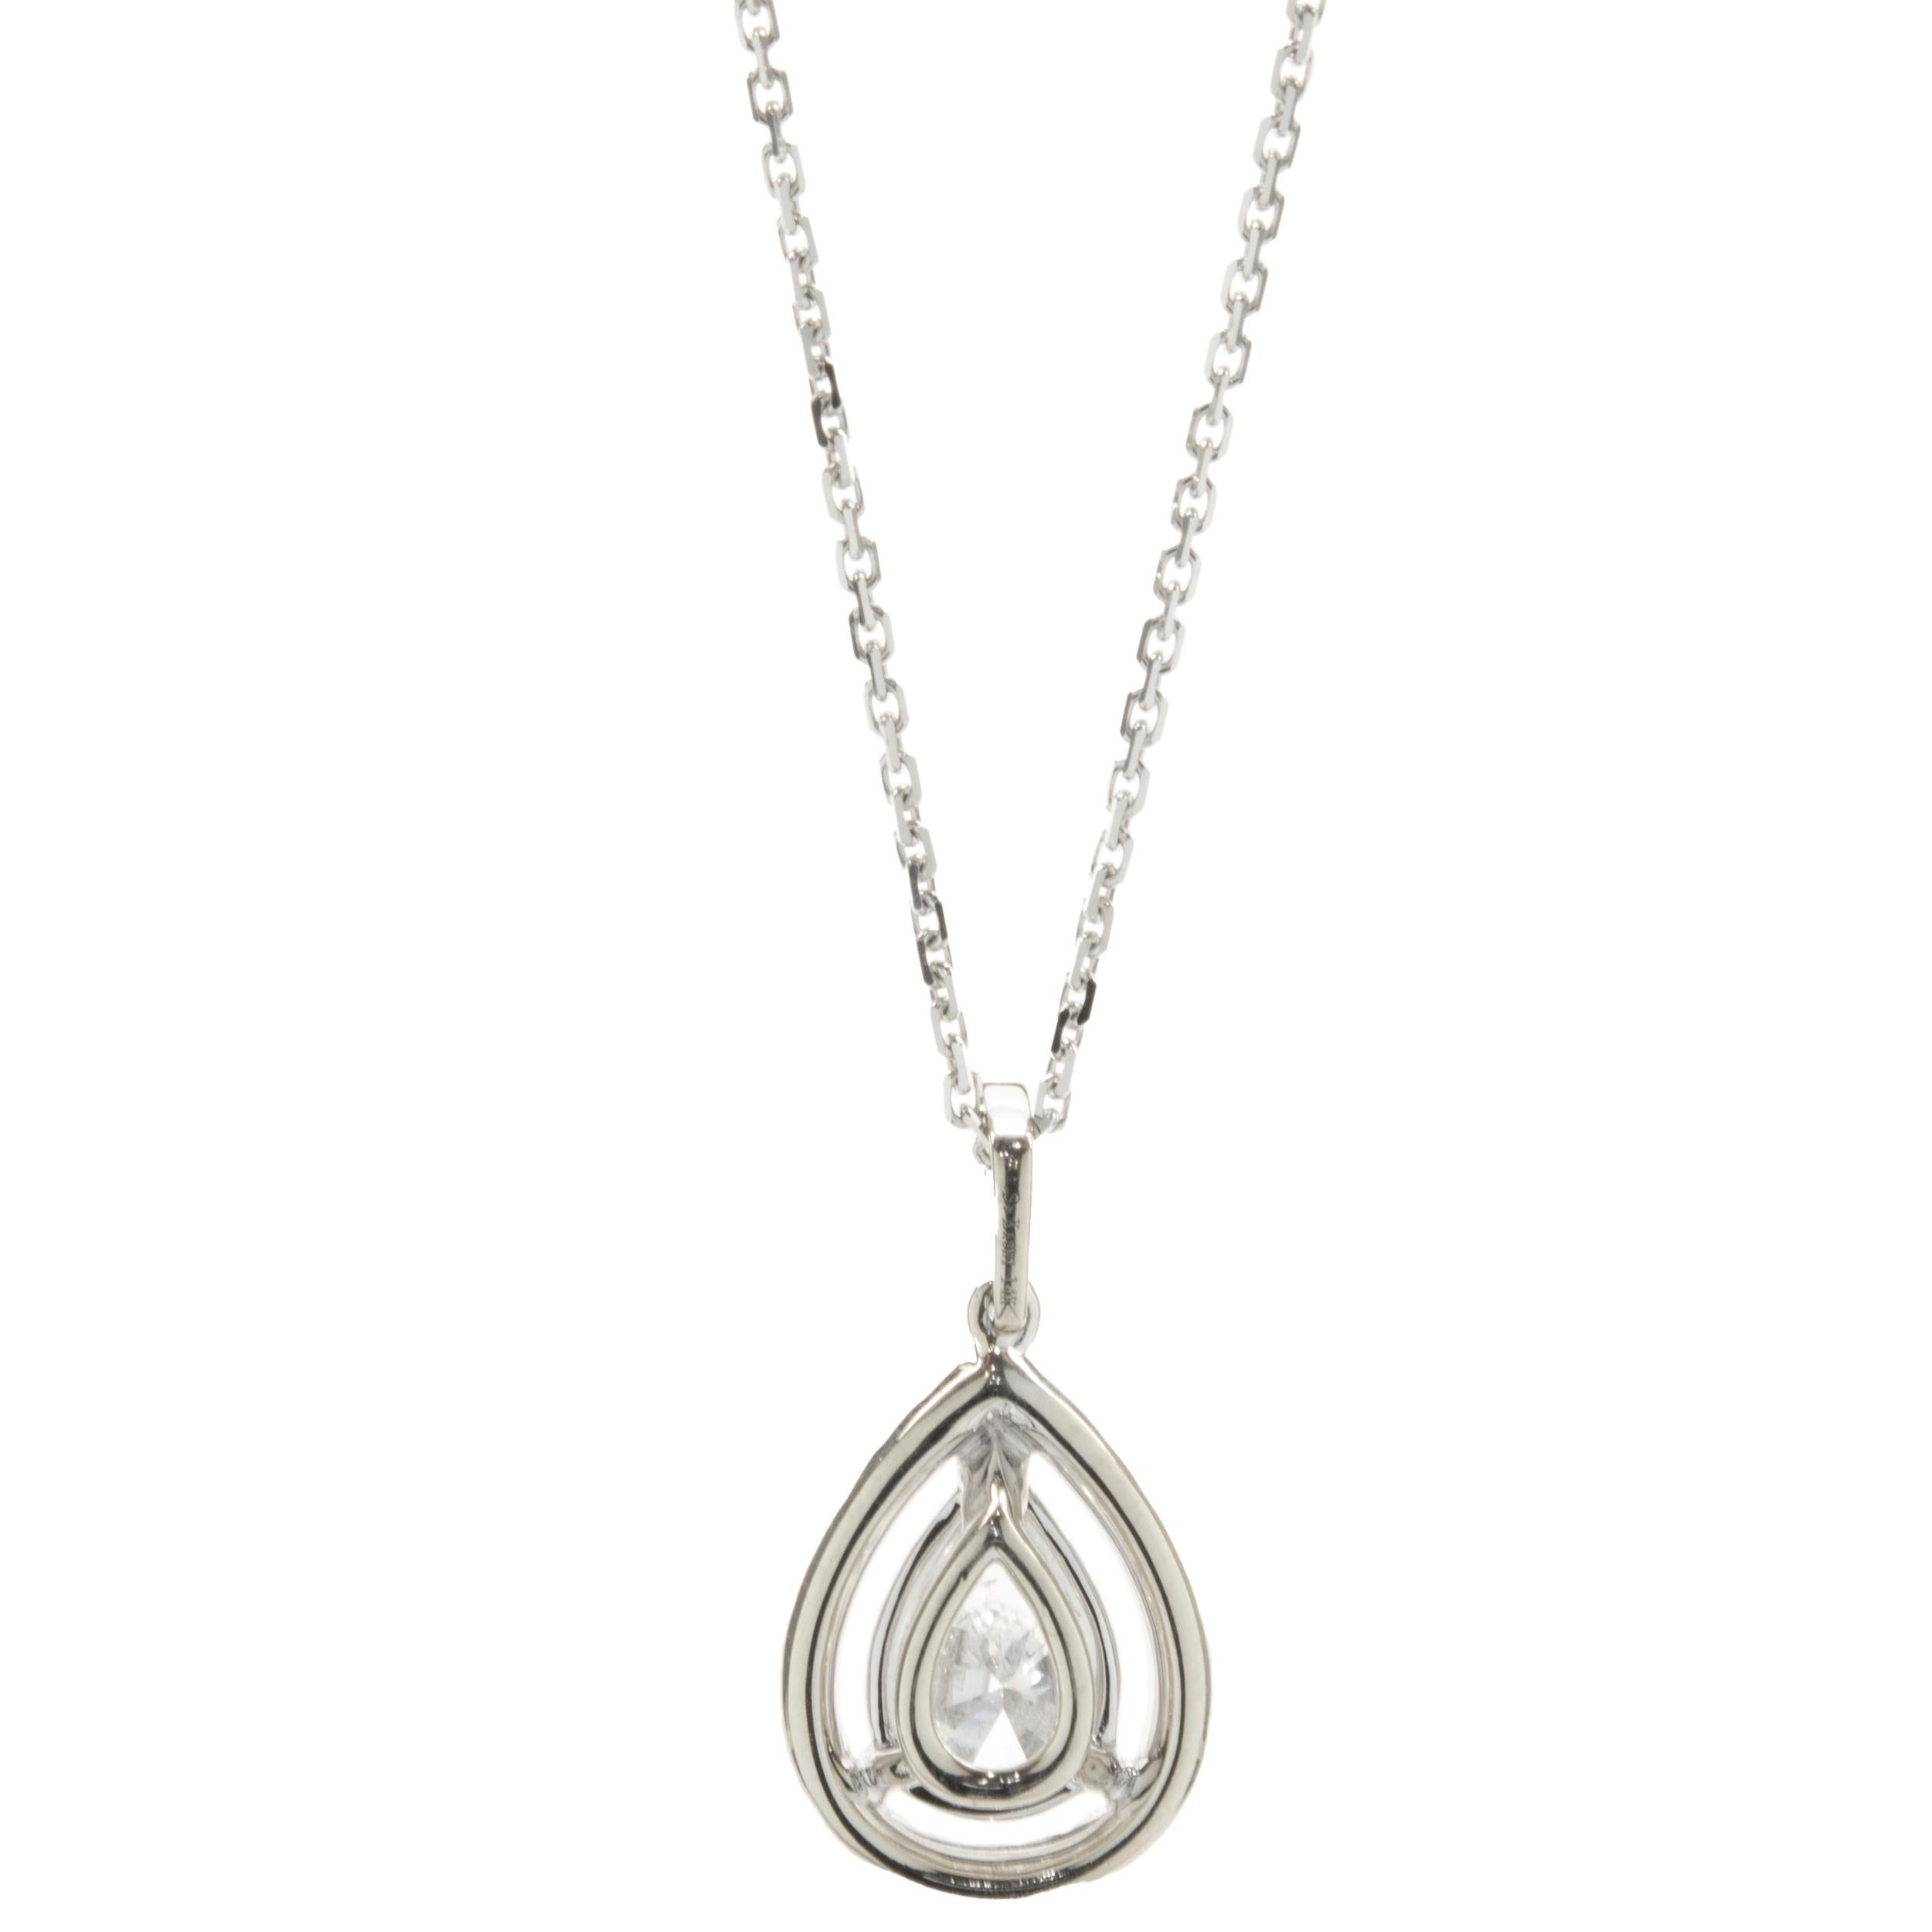 Designer: custom	
Material: 14K white gold
Diamonds: 1 pear cut = 1.10cttw
Color: I
Clarity: SI2
Diamonds: 28 round cut = 0.30cttw
Color: H
Clarity: SI1
Dimensions: necklace measures 18-inches in length 
Weight: 5 grams